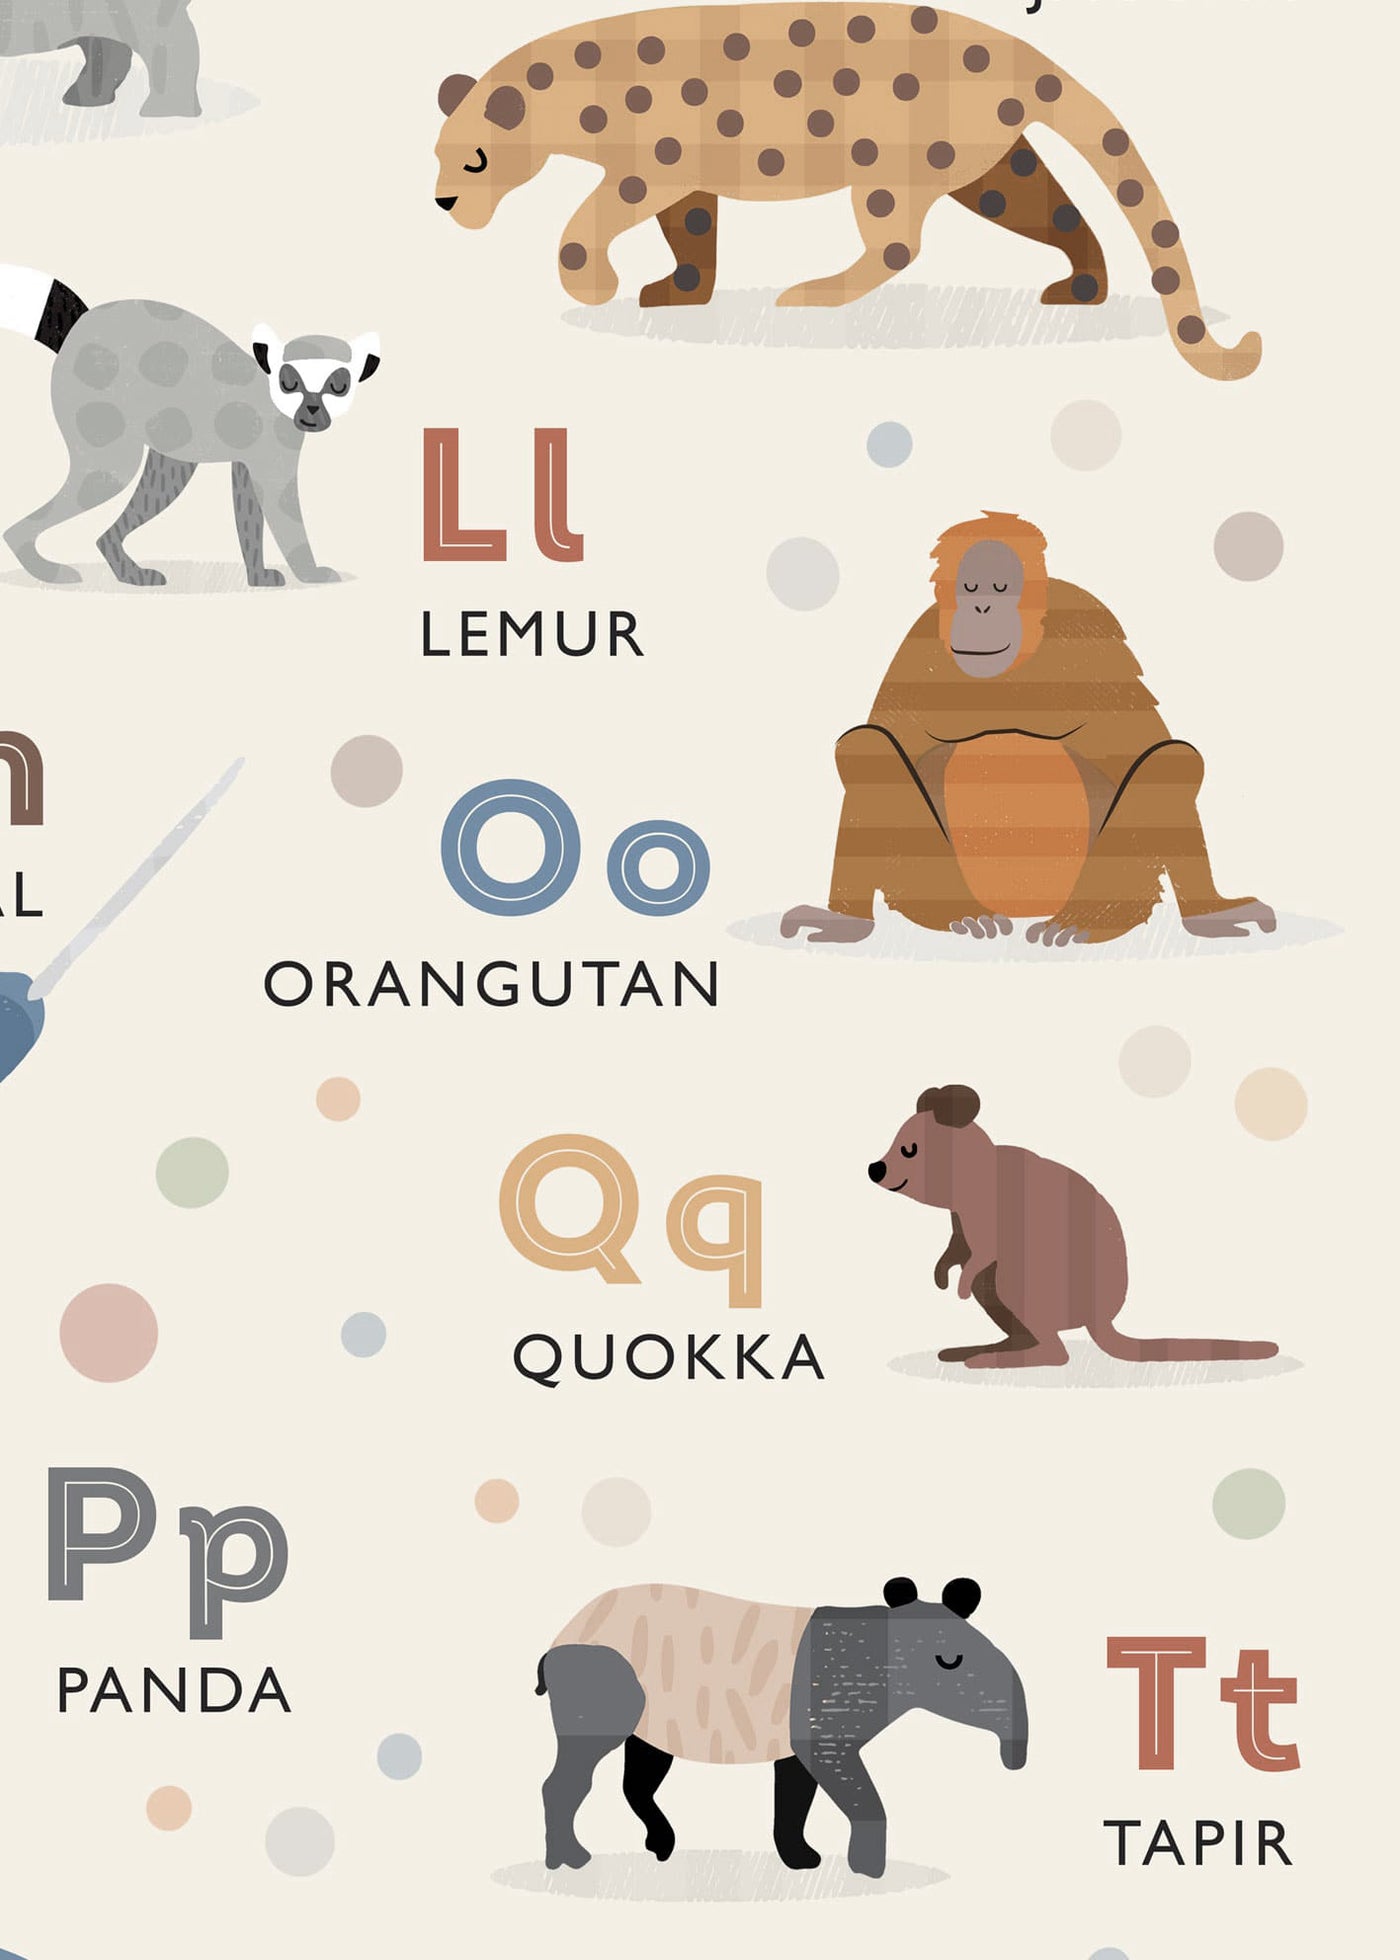 A close-up view of the Animal Alphabet print showcasing the detailed illustrations of a lemur, orangutan, quokka, and tapir, with alphabet letters in a clean, modern typeface.